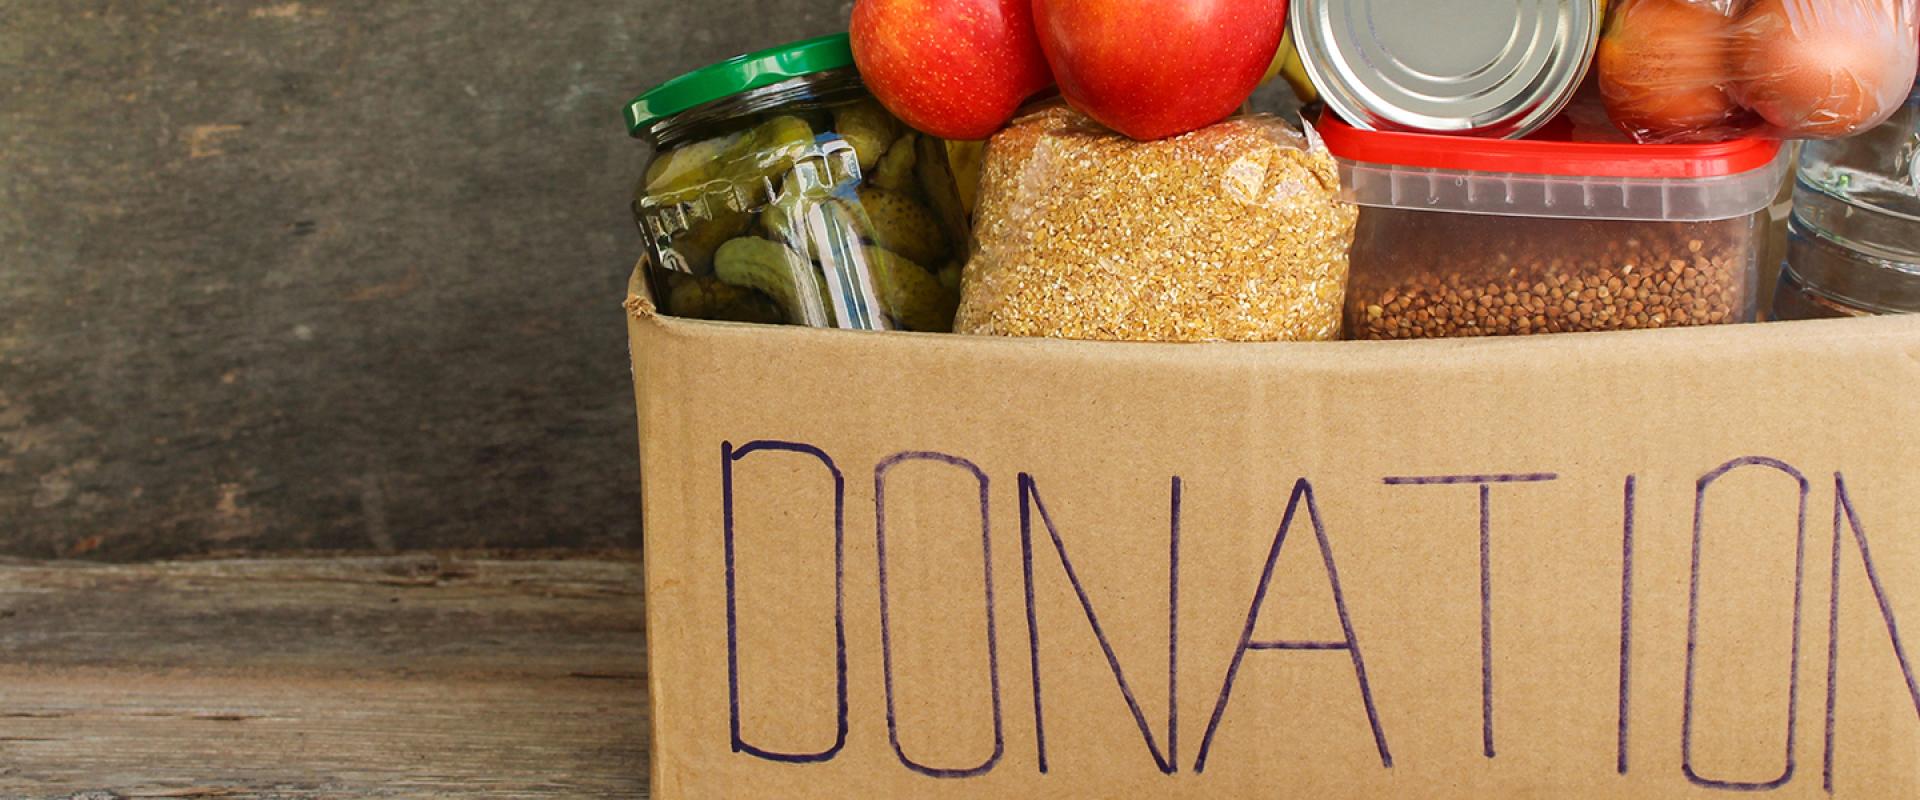 Groceries in a box with donations written on the side